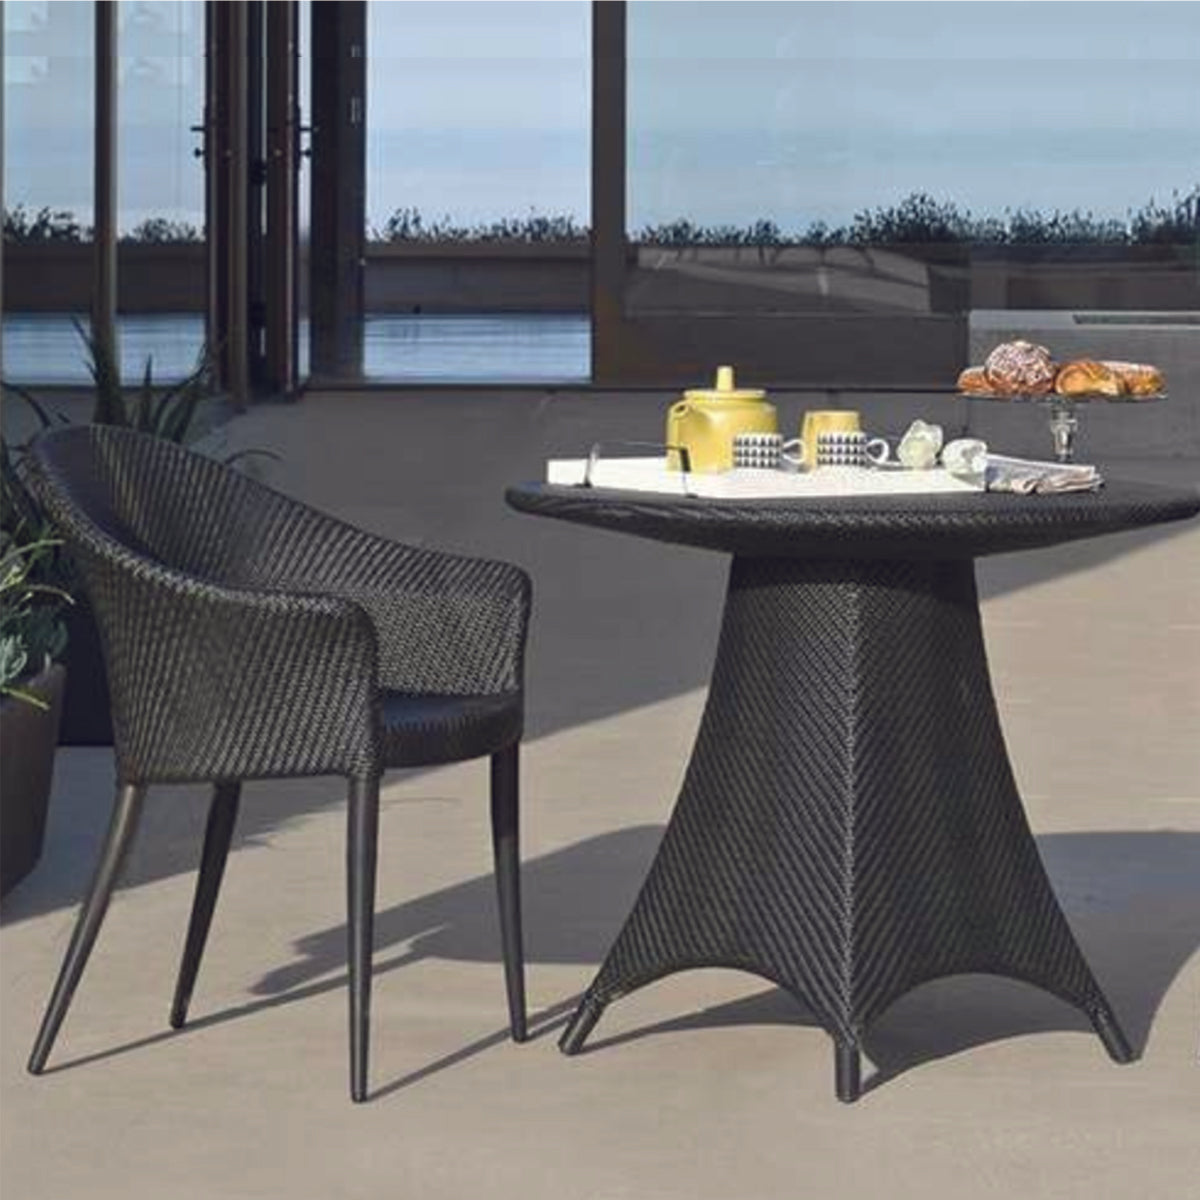 Wing Design Balcony Set with Table in Wicker <br> VDC 631